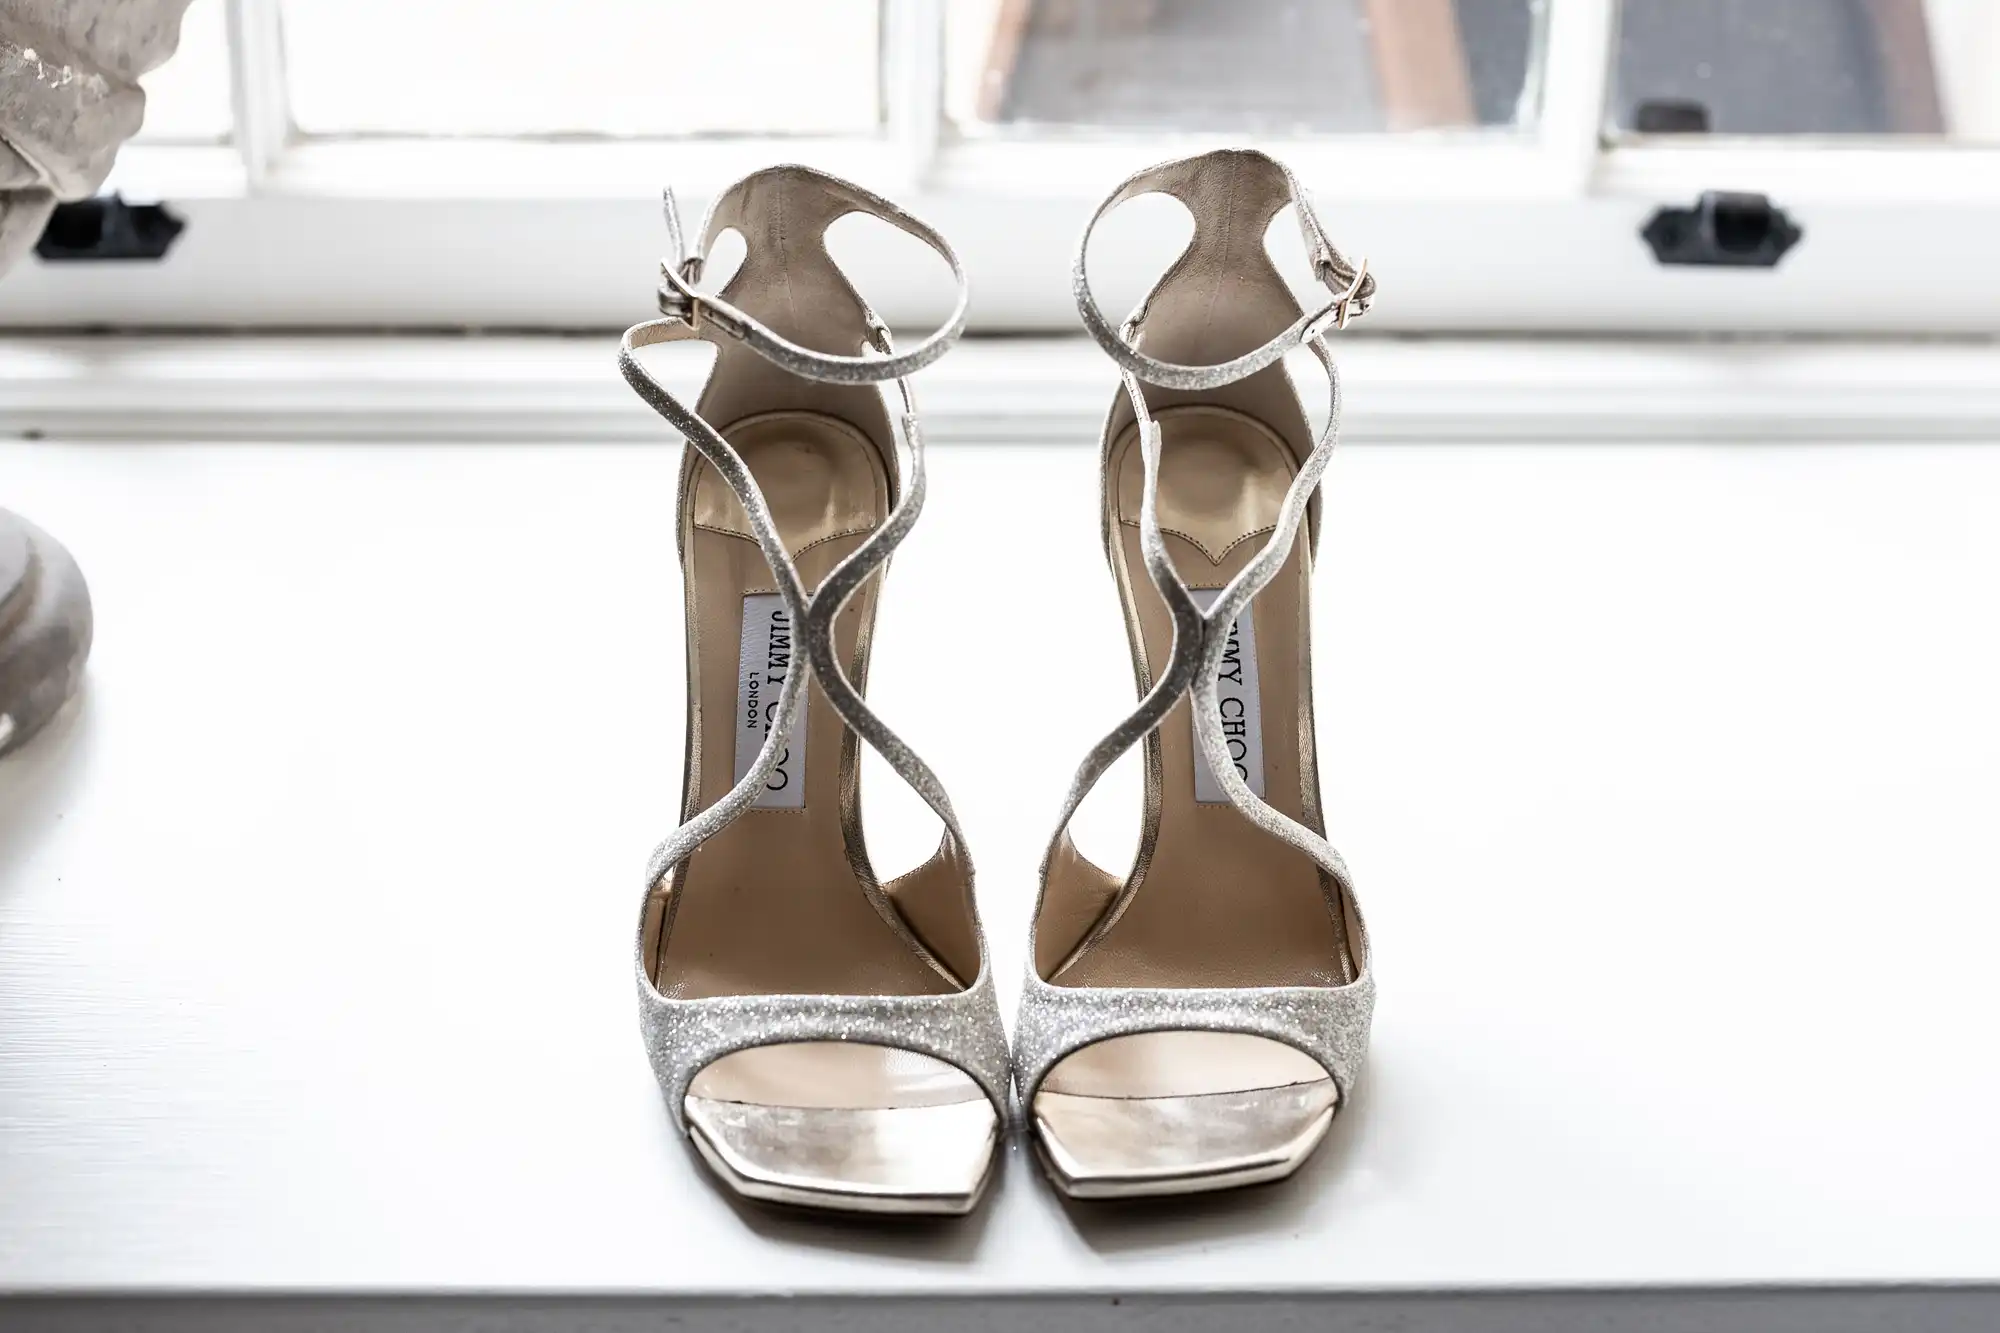 A pair of silver glitter high-heeled sandals placed neatly on a windowsill.